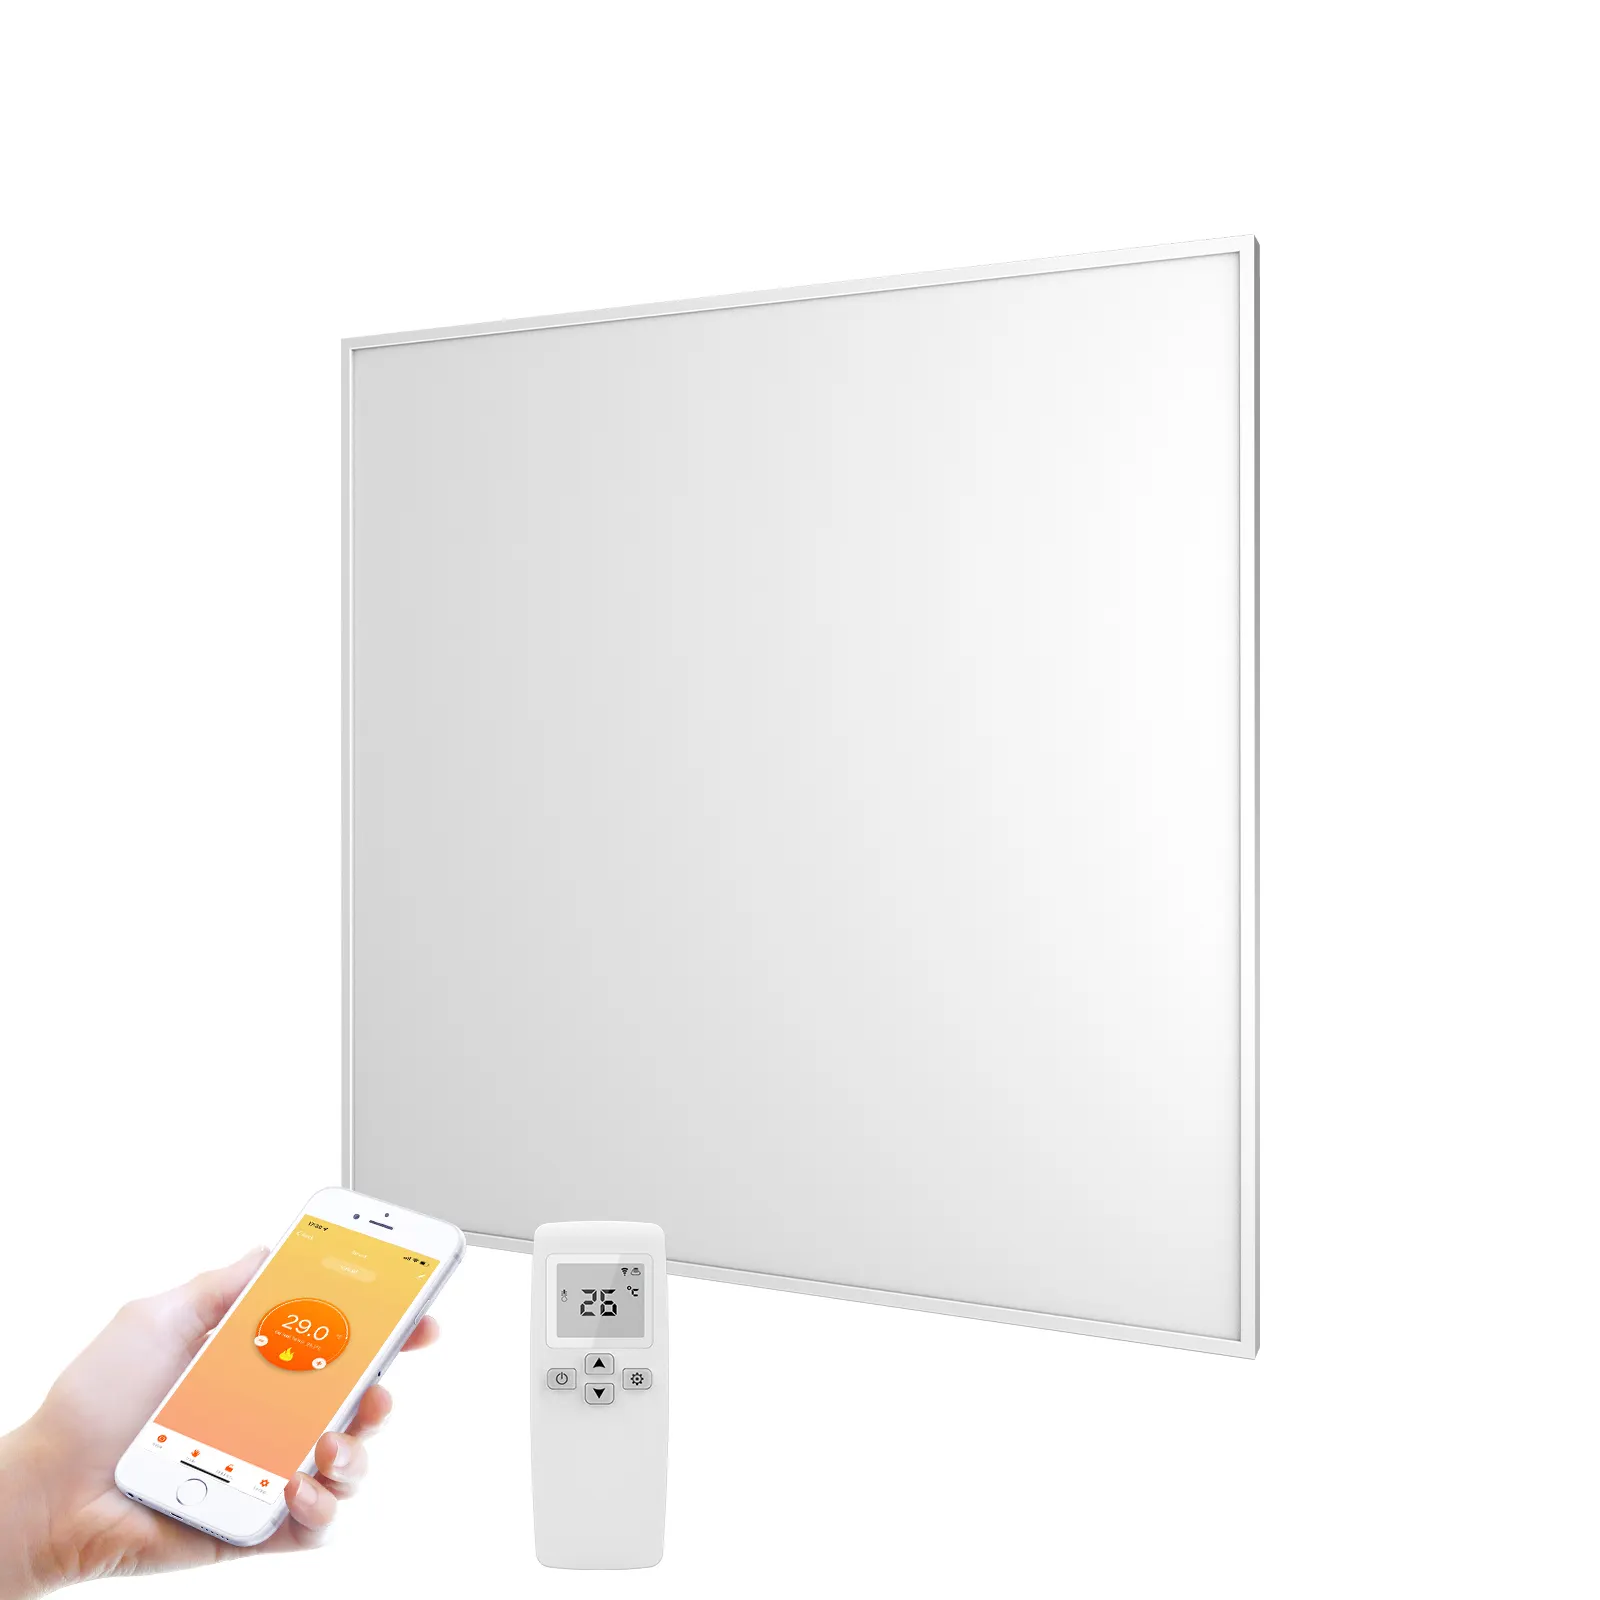 New Type Far Infrared Carbon Crystal Heating Panel with / without WIFI Remote control, infrared heater for warming